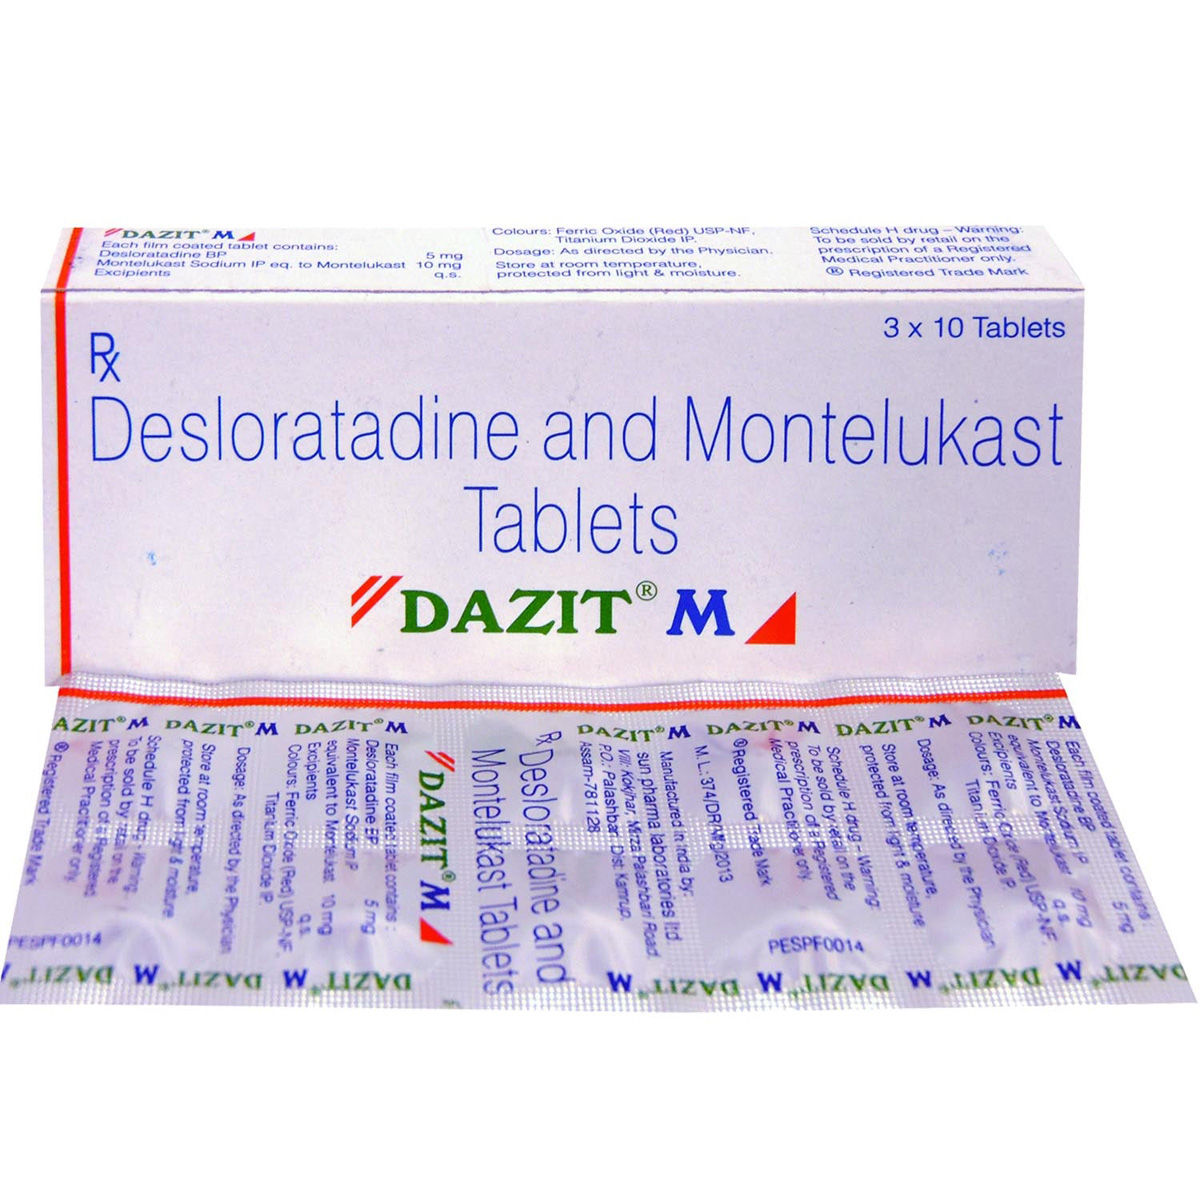 Dazit M Tablet 10's Price, Uses, Side Effects, Composition ...